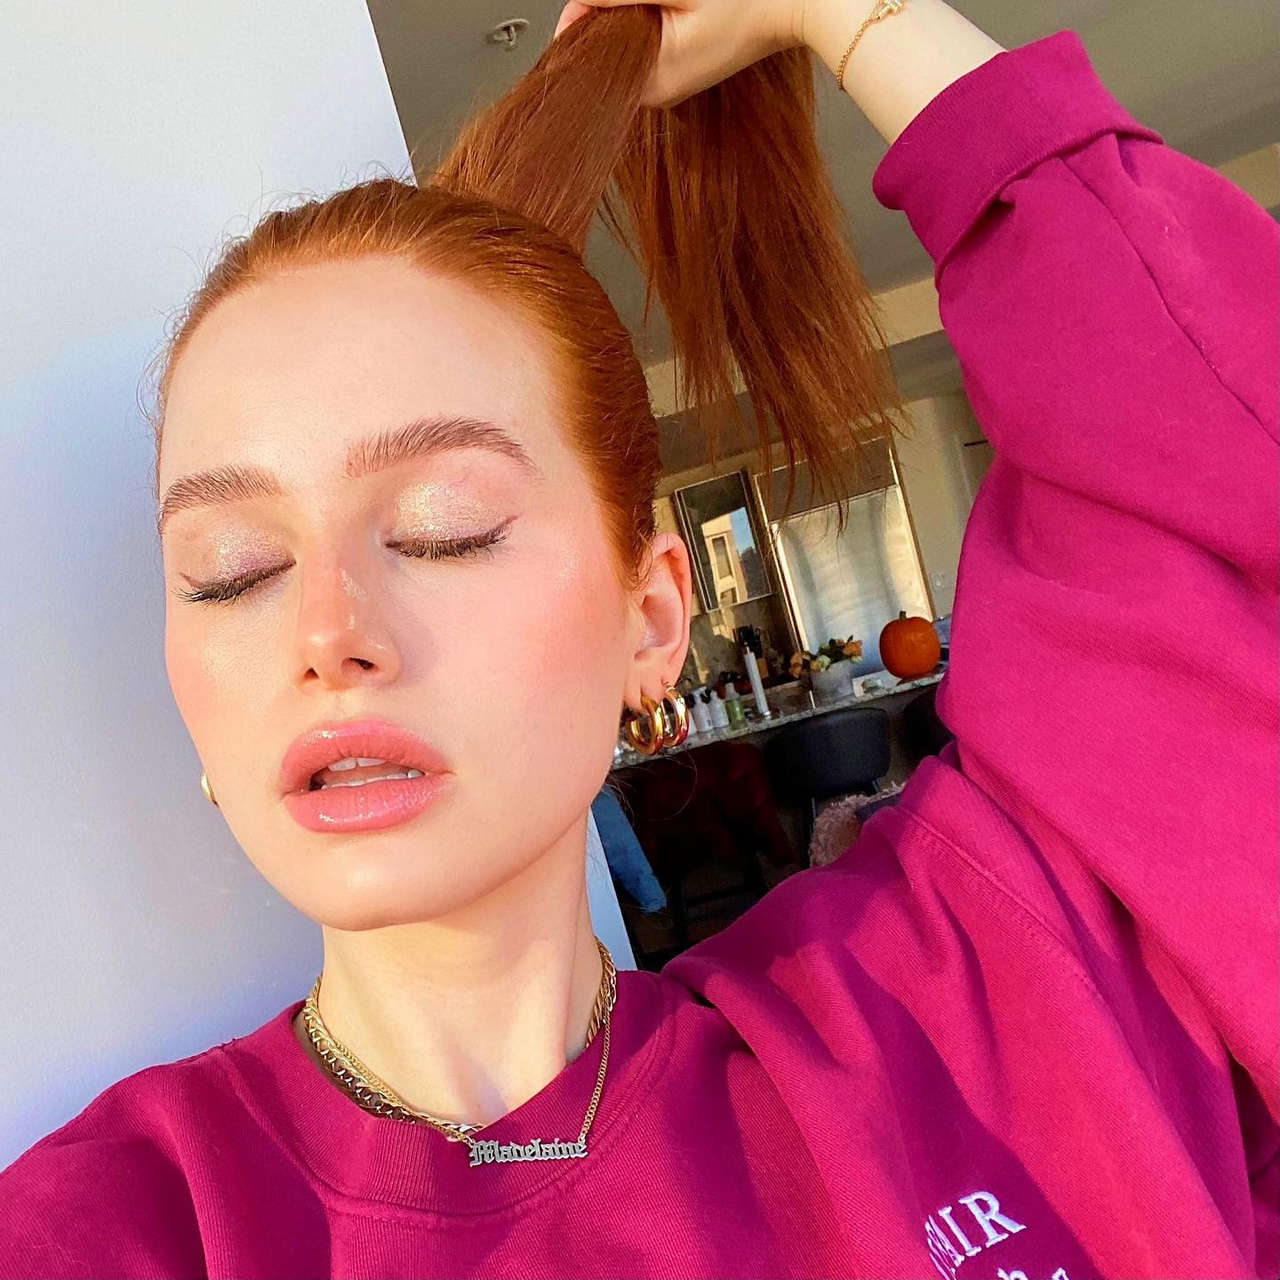 Madelaine Petschs Lips And Ponytail She Needs A Brutal Facefuck Immediately NSF